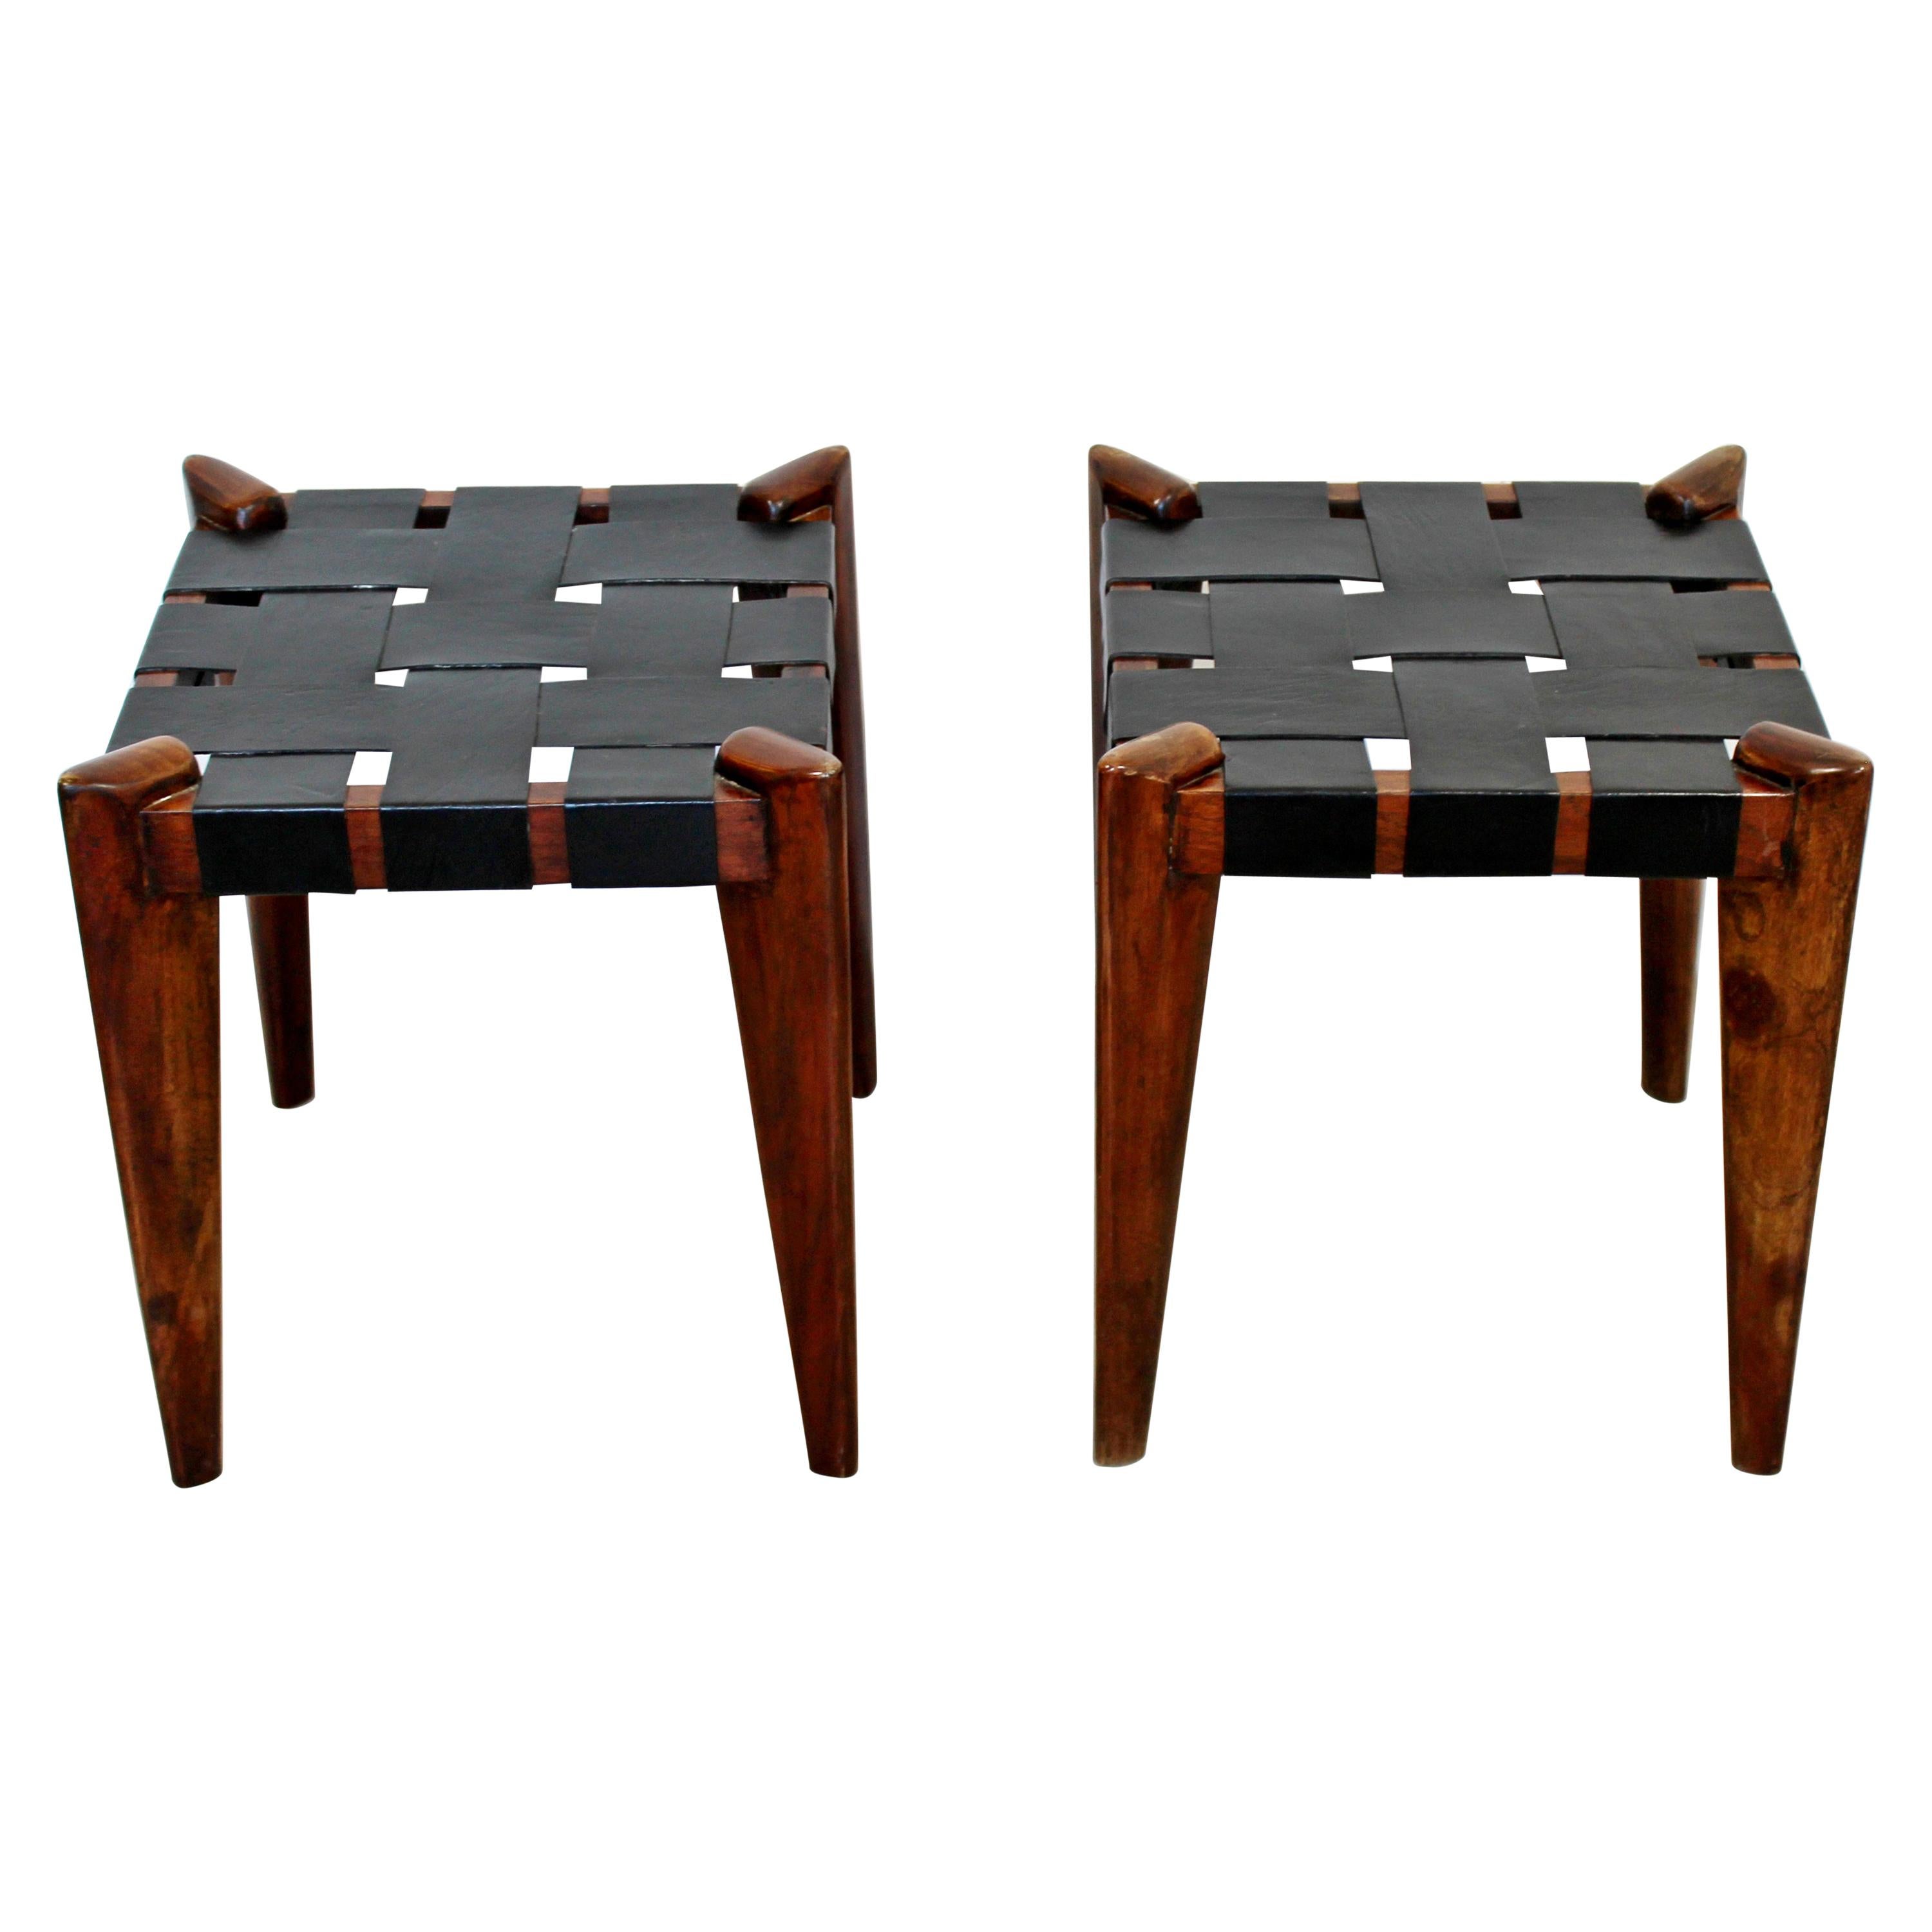 Mid-Century Modern Edmund Spence Woven Black Leather Benches Stools 1960s, Pair